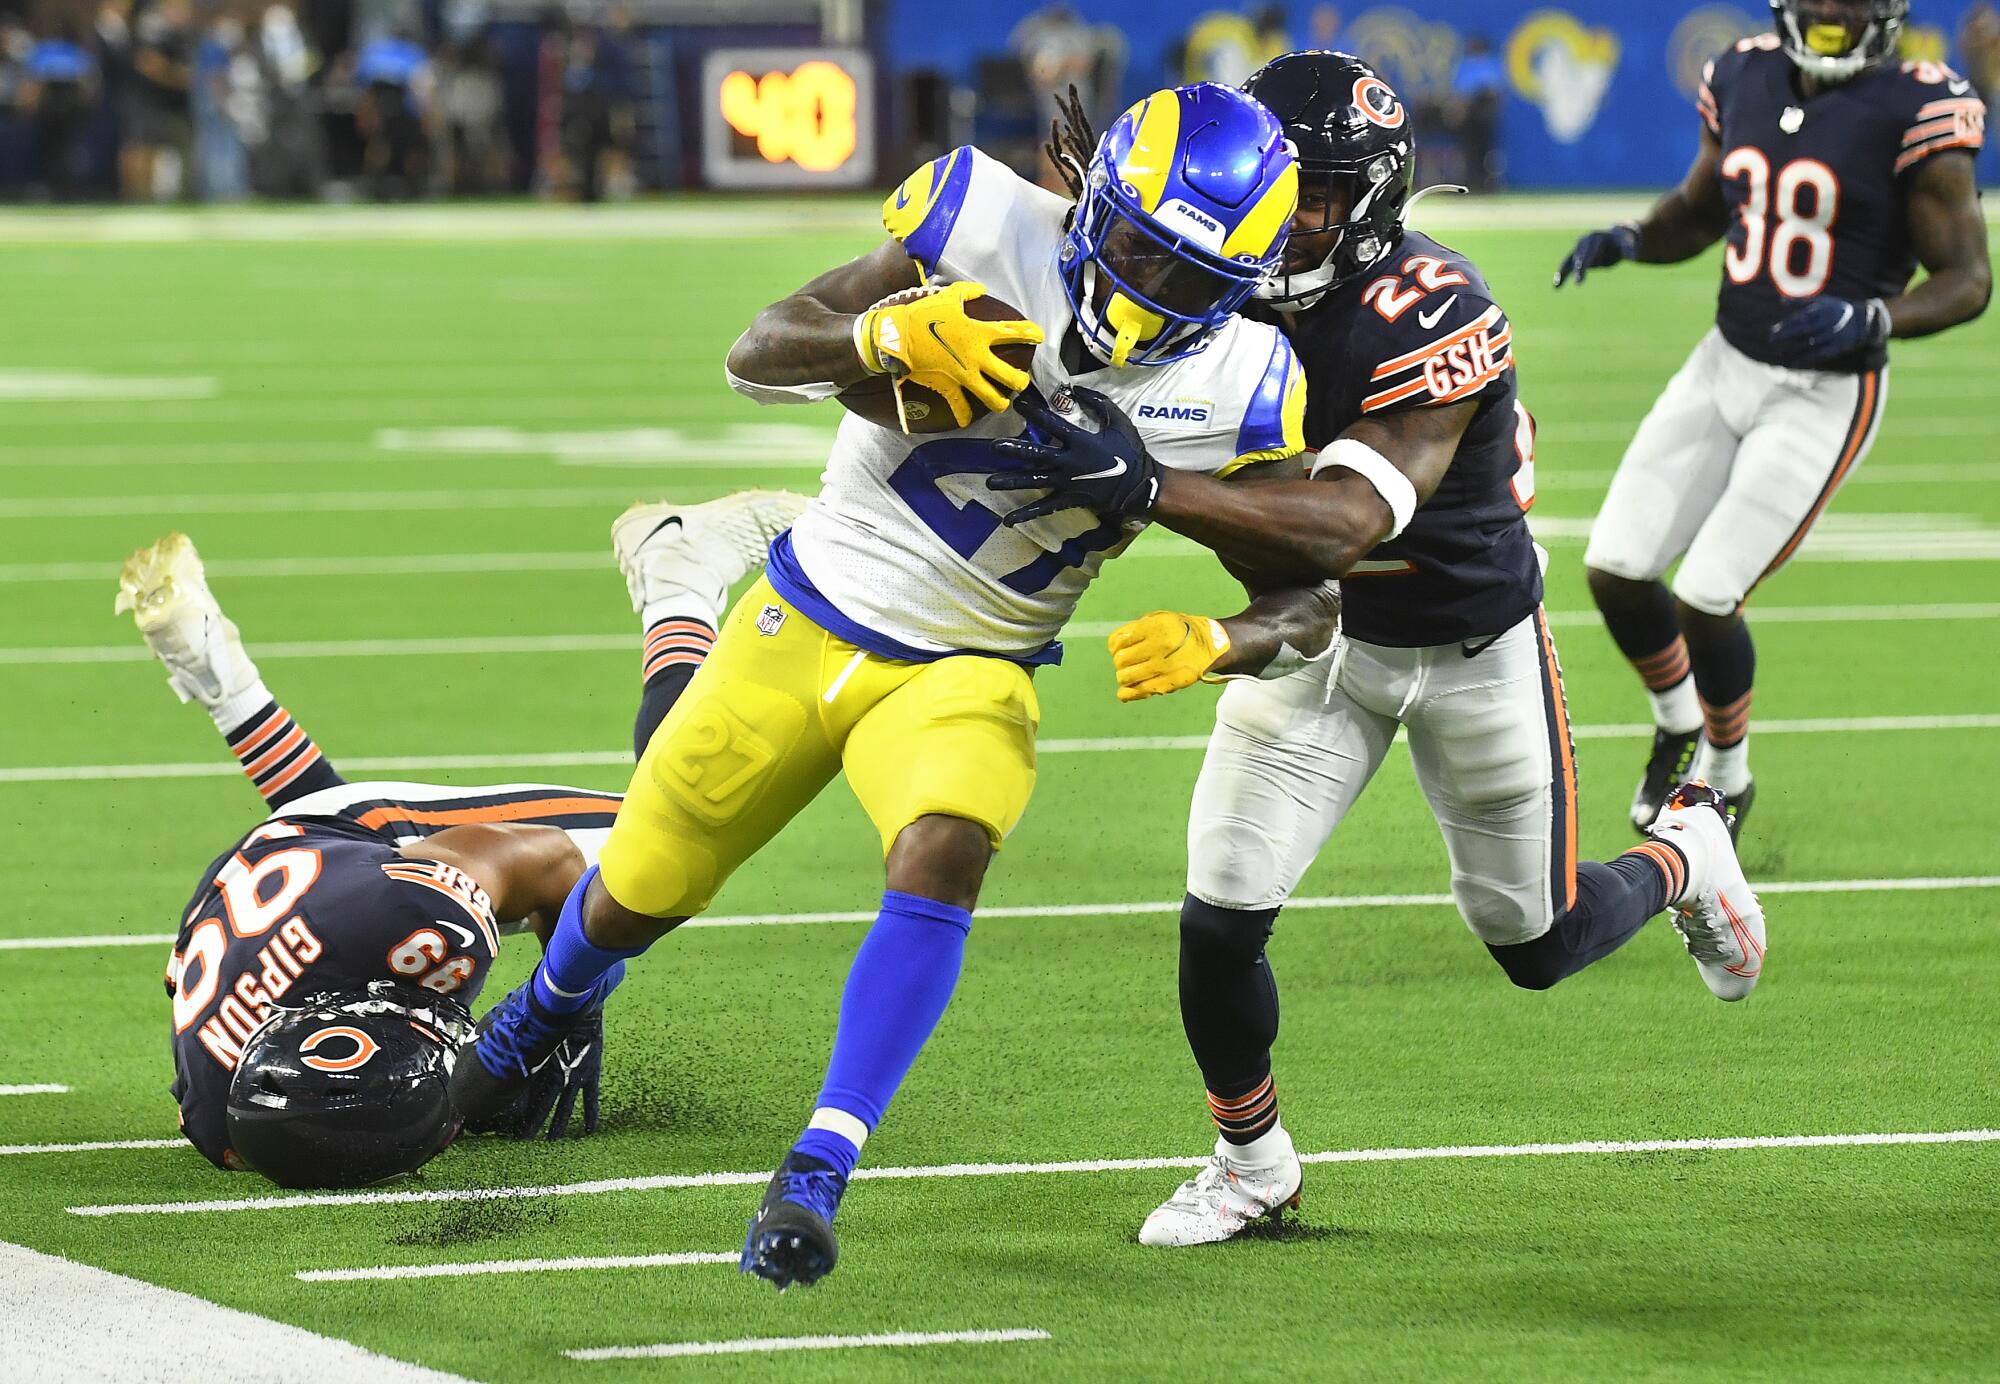 Los Angeles Rams running back Darrell Henderson gets pushed out of bounds by Chicago Bears defensive backs Kindle Vildor